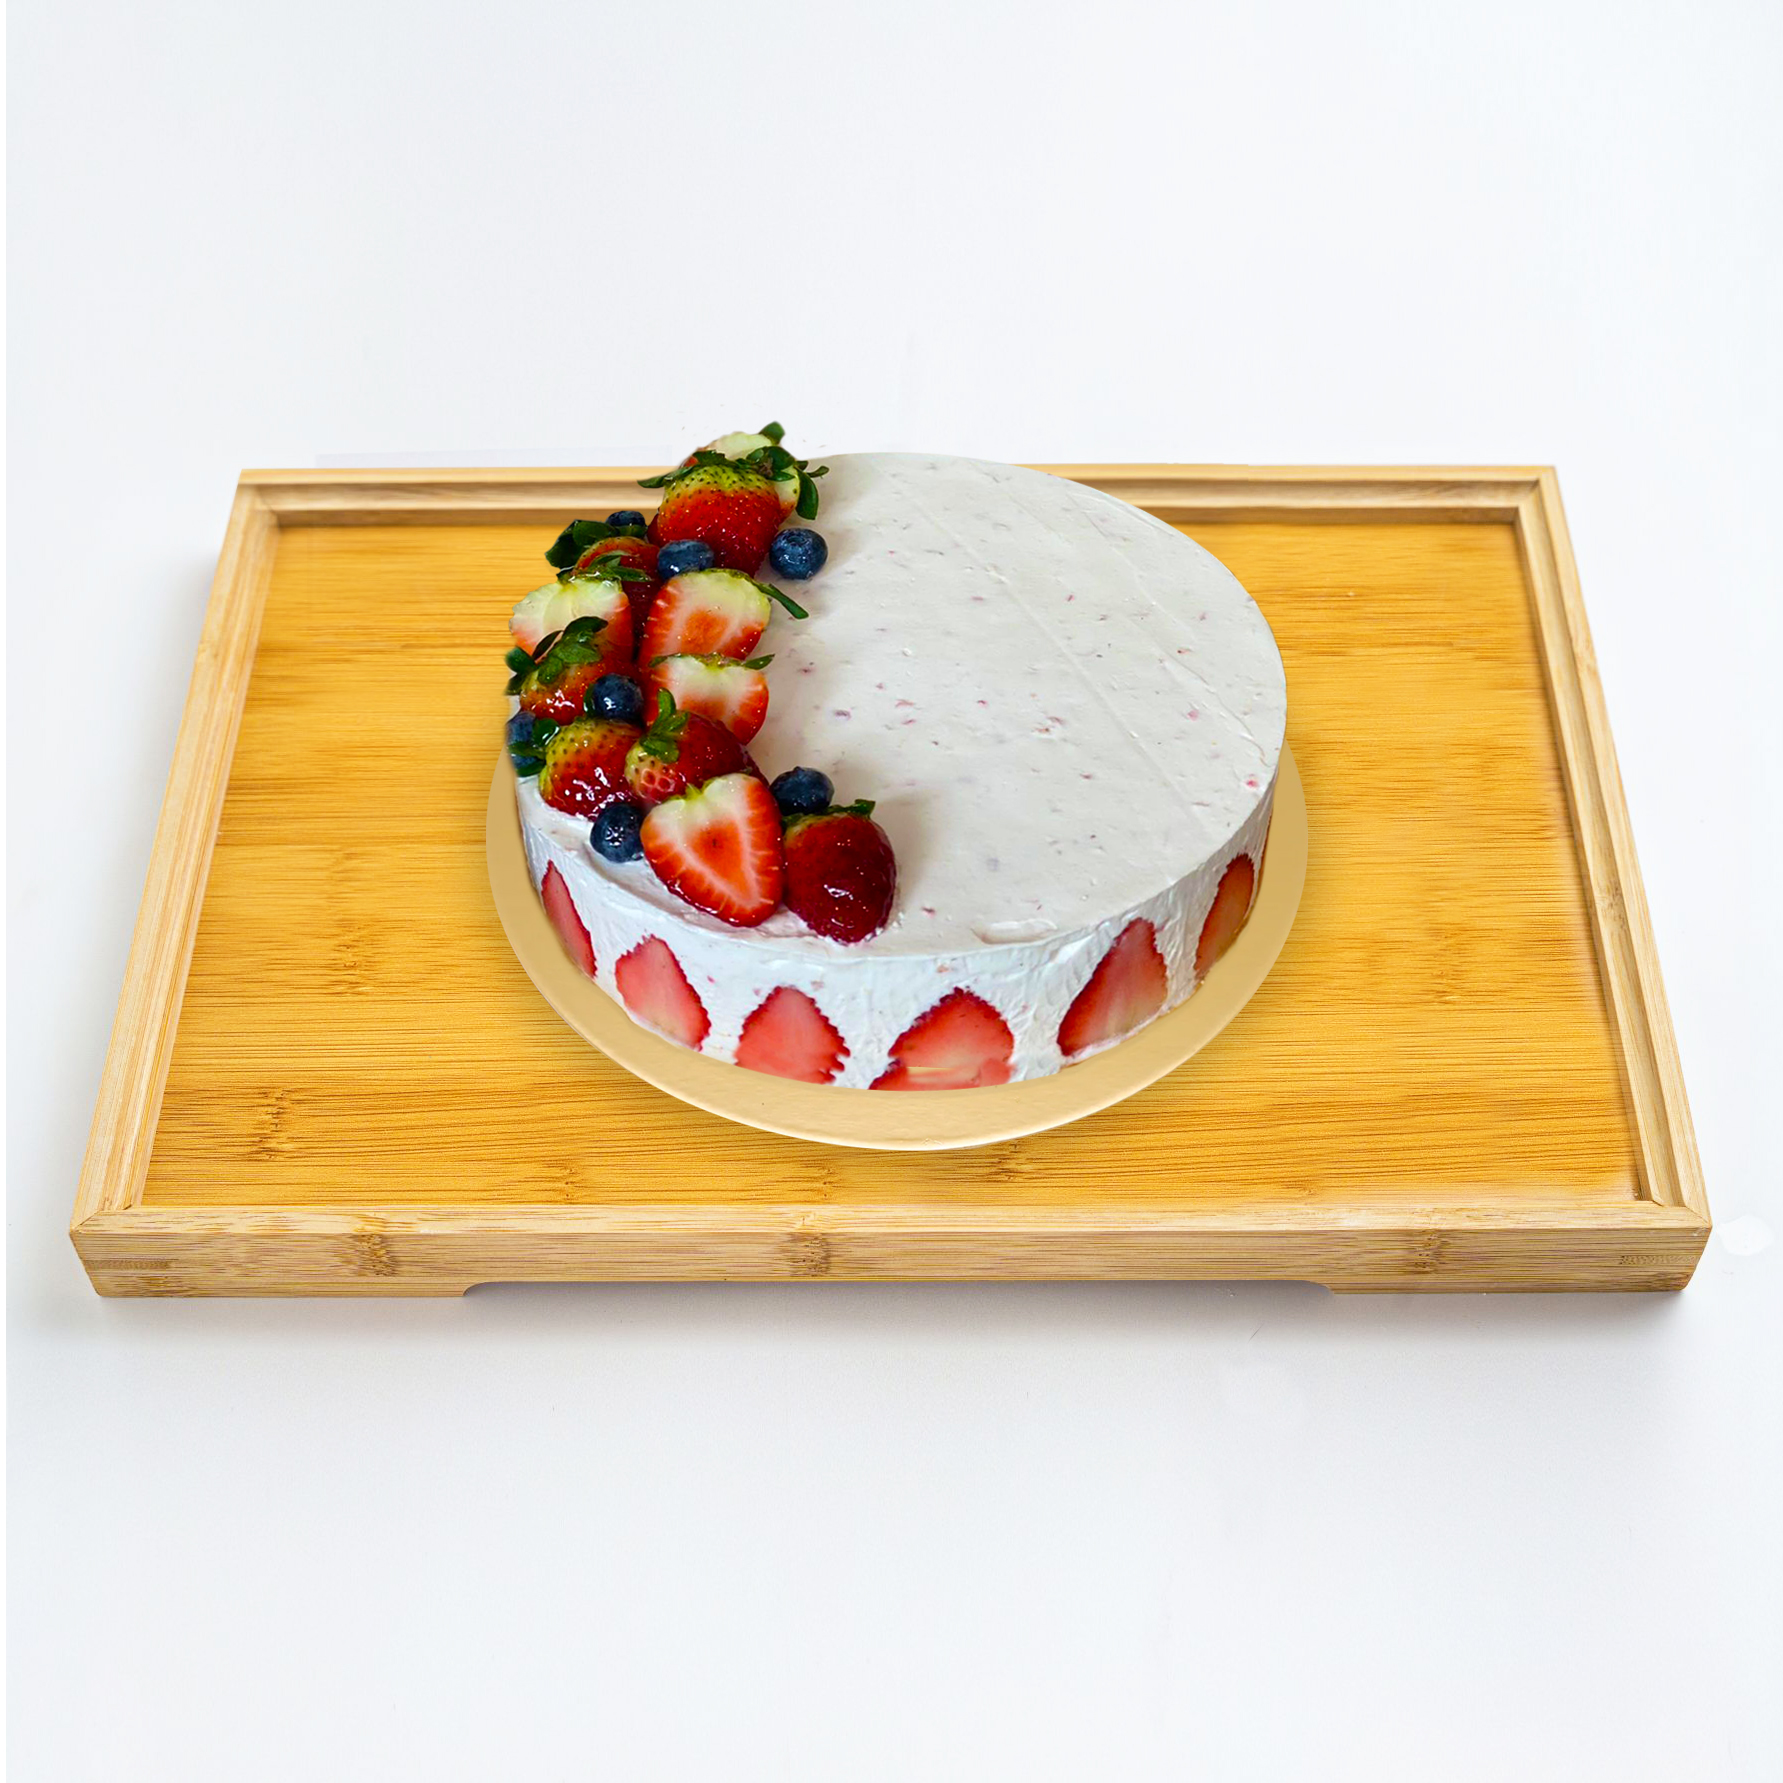 Medium 18cm Cakes Archives - Brenell Quality Desserts